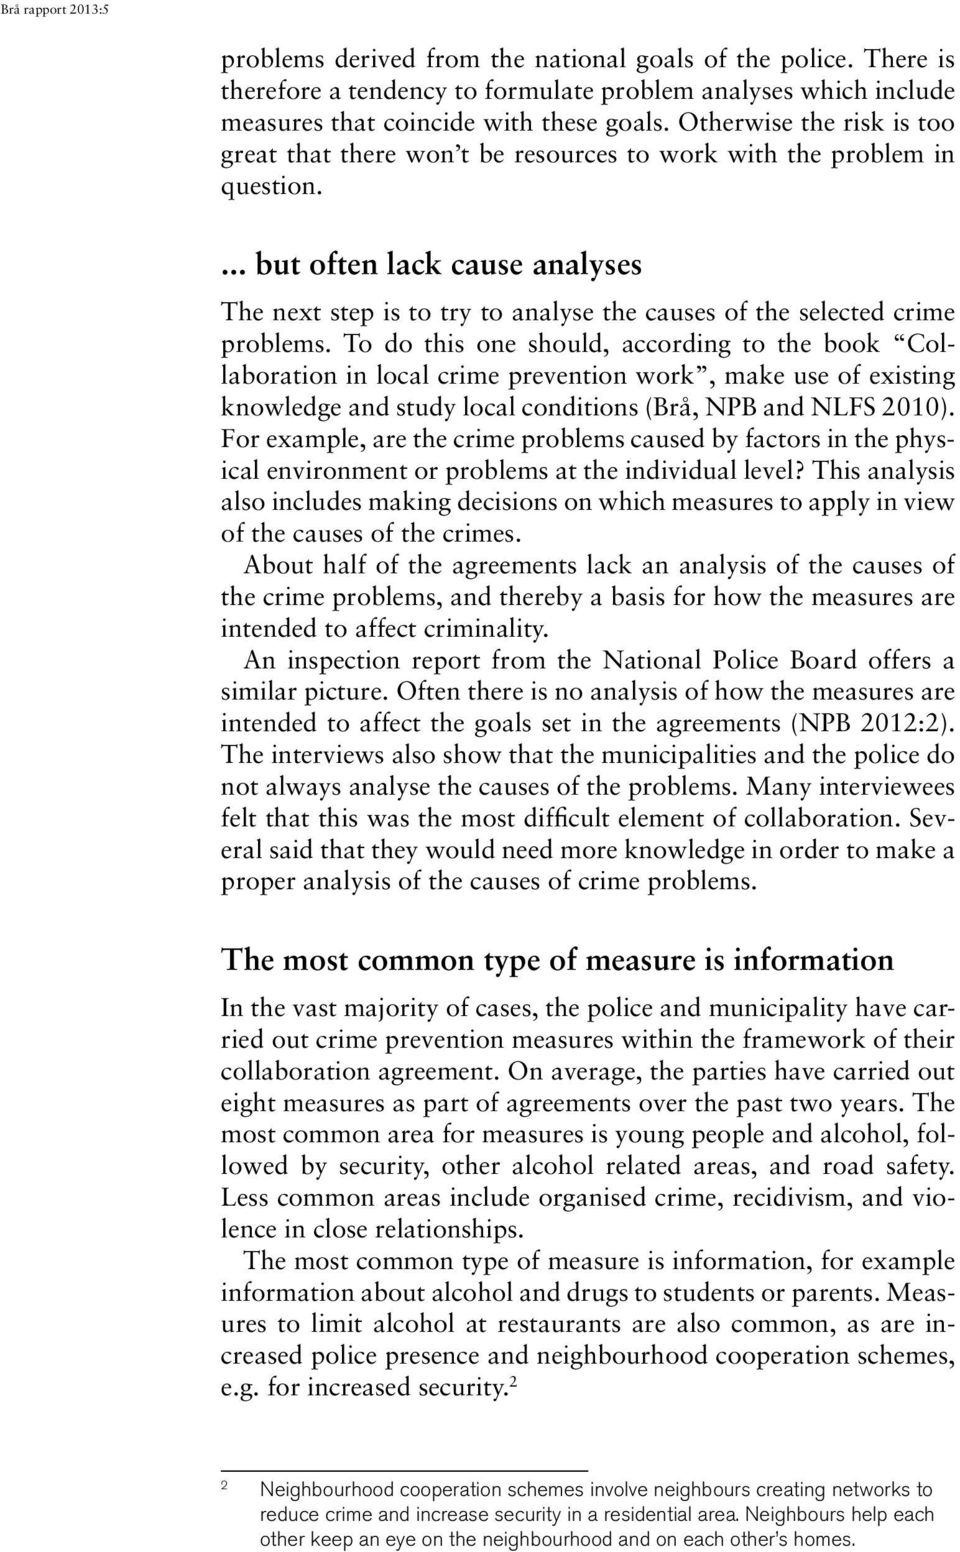 ... but often lack cause analyses The next step is to try to analyse the causes of the selected crime problems.